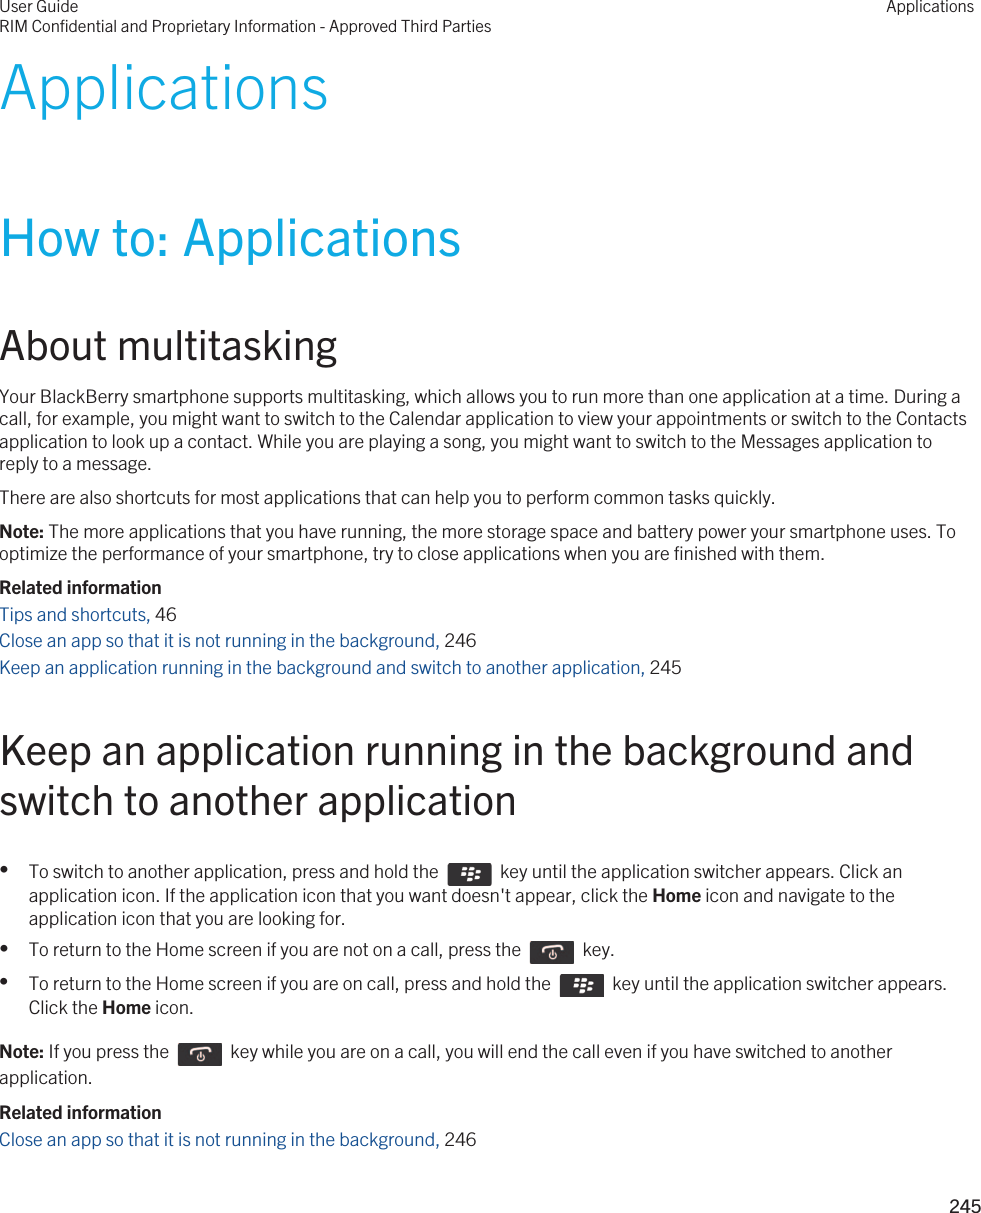 ApplicationsHow to: ApplicationsAbout multitaskingYour BlackBerry smartphone supports multitasking, which allows you to run more than one application at a time. During a call, for example, you might want to switch to the Calendar application to view your appointments or switch to the Contacts application to look up a contact. While you are playing a song, you might want to switch to the Messages application to reply to a message.There are also shortcuts for most applications that can help you to perform common tasks quickly.Note: The more applications that you have running, the more storage space and battery power your smartphone uses. To optimize the performance of your smartphone, try to close applications when you are finished with them.Related informationTips and shortcuts, 46 Close an app so that it is not running in the background, 246Keep an application running in the background and switch to another application, 245Keep an application running in the background and switch to another application•To switch to another application, press and hold the    key until the application switcher appears. Click an application icon. If the application icon that you want doesn&apos;t appear, click the Home icon and navigate to the application icon that you are looking for.•To return to the Home screen if you are not on a call, press the    key. •To return to the Home screen if you are on call, press and hold the    key until the application switcher appears. Click the Home icon.Note: If you press the    key while you are on a call, you will end the call even if you have switched to another application.Related informationClose an app so that it is not running in the background, 246User GuideRIM Confidential and Proprietary Information - Approved Third PartiesApplications245 